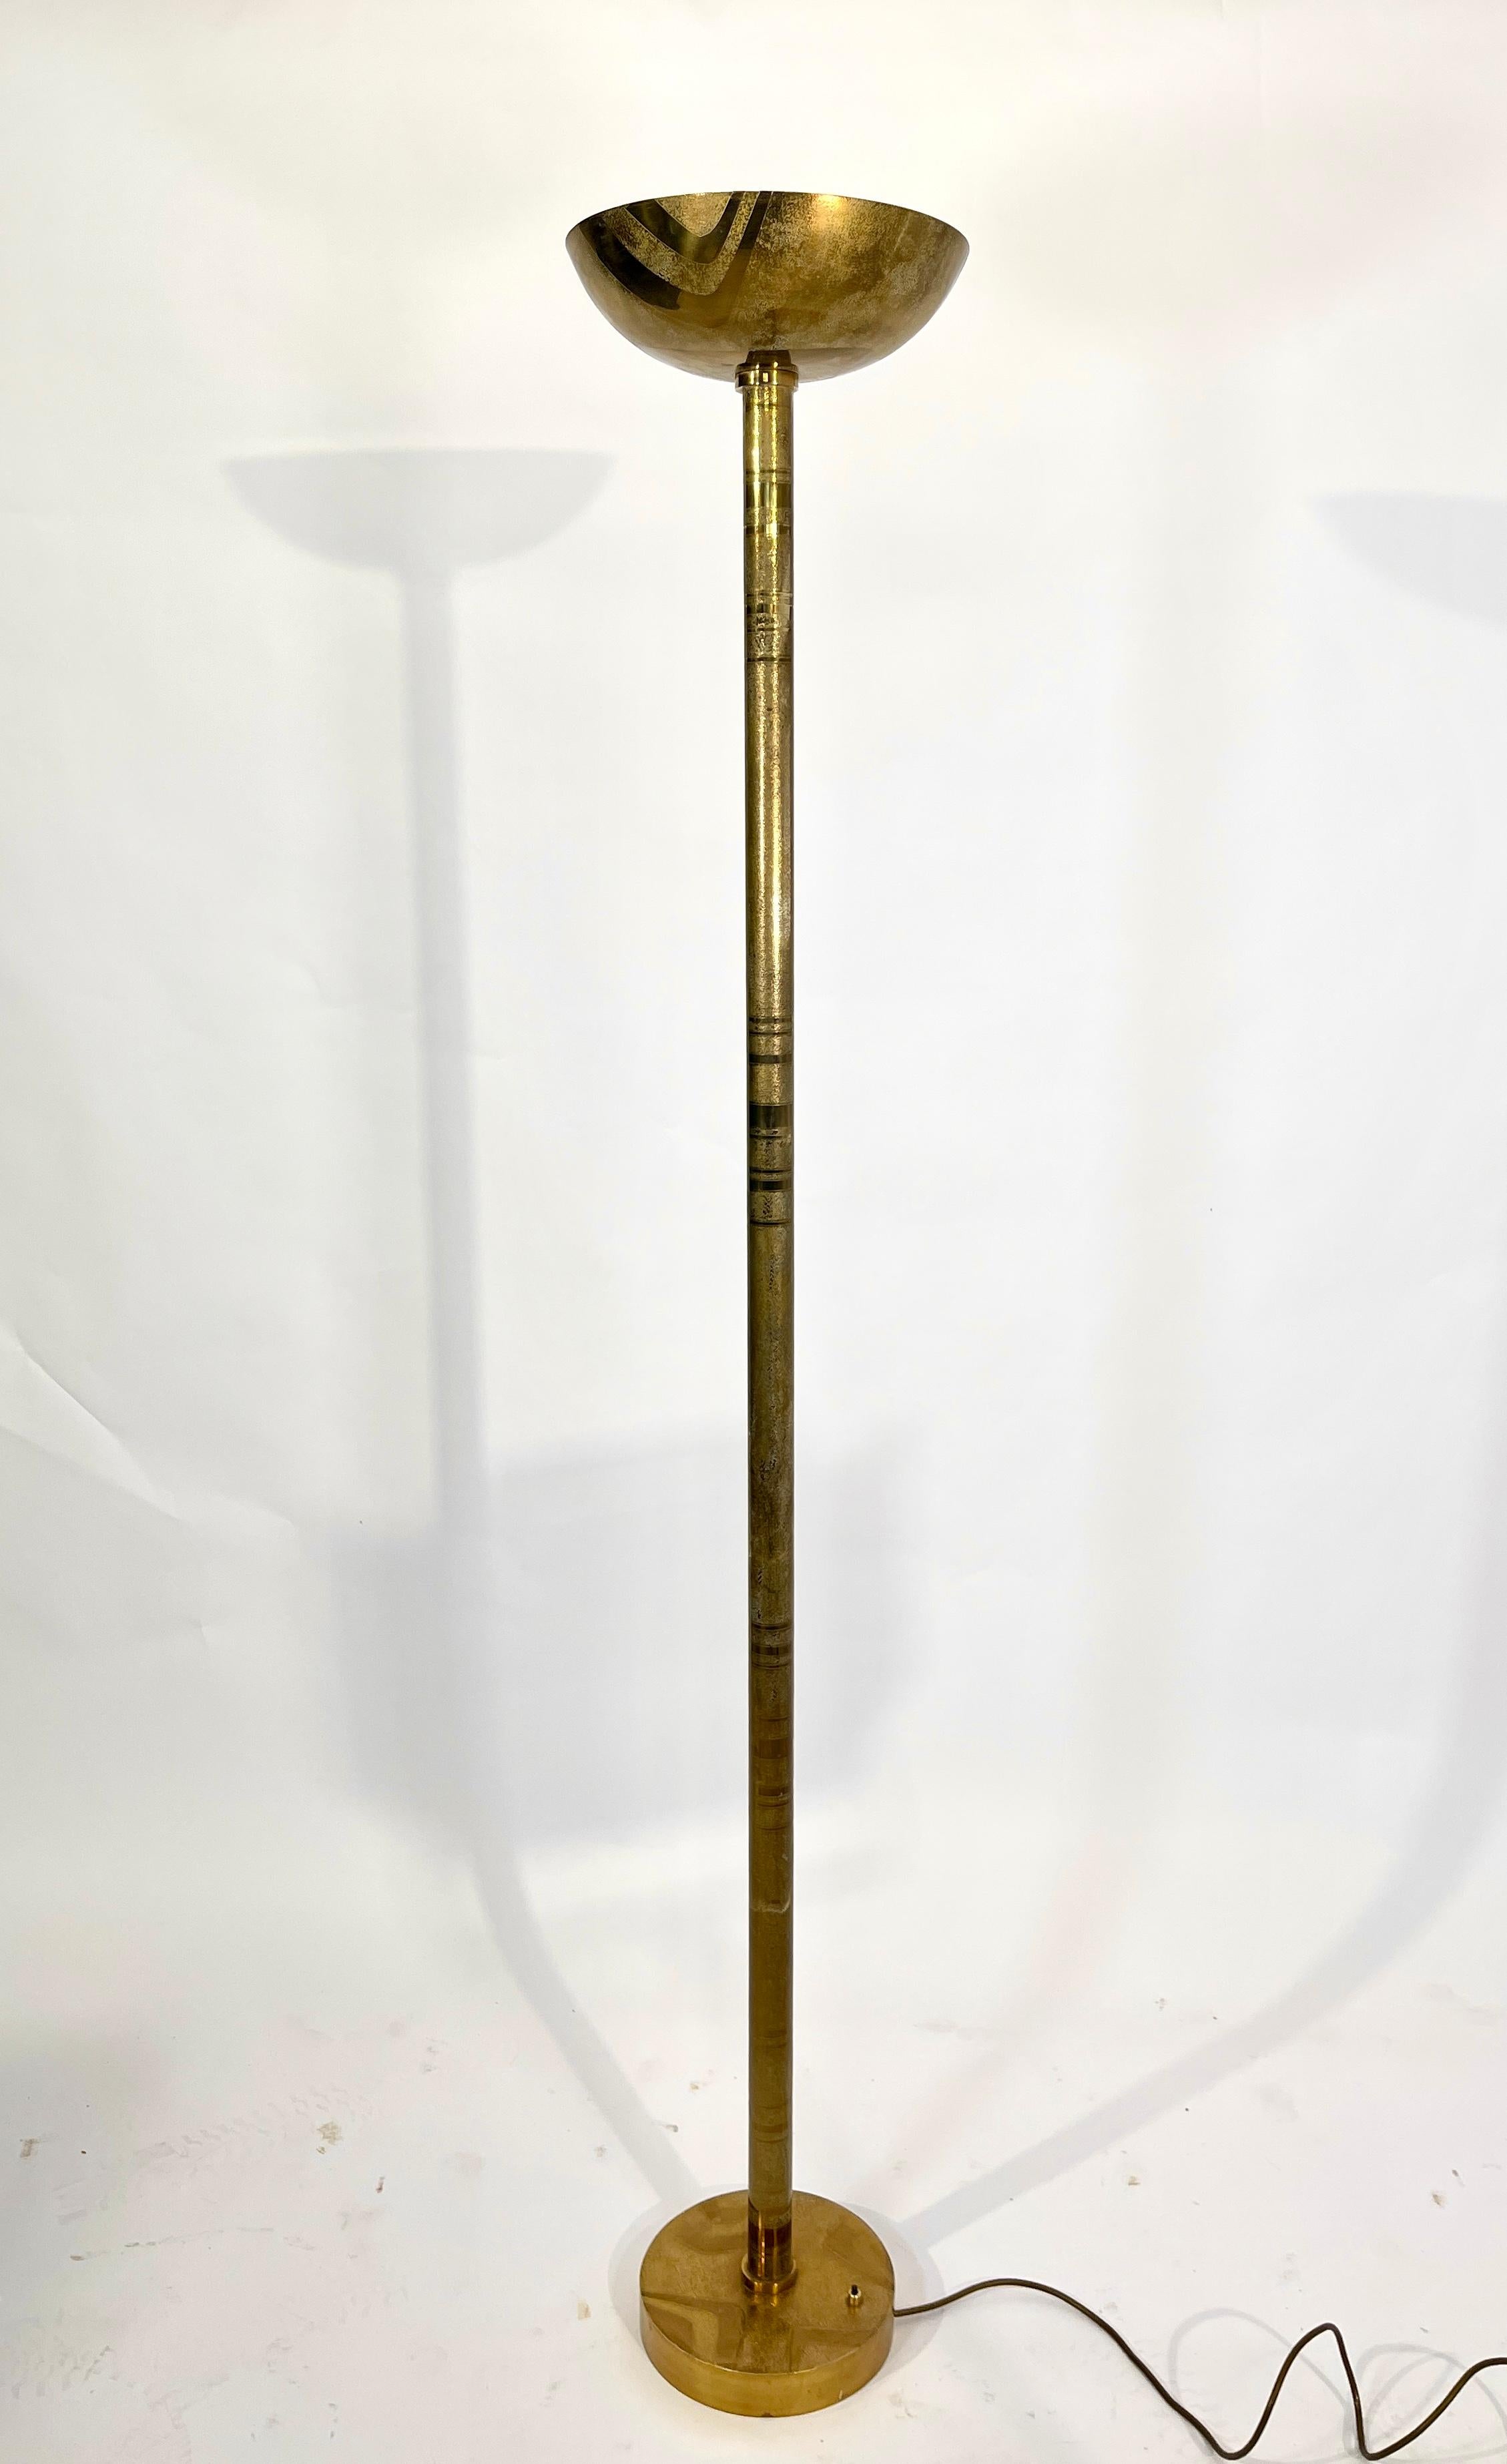 From the 1980s comes this one of a kind floor lamps in FULL etched brass. This Floor lamps received new electric al wires according to the latest safety standards. Signed by the artist. 
This Rare Floor Lamps is ONE OF KIND piece special order for a